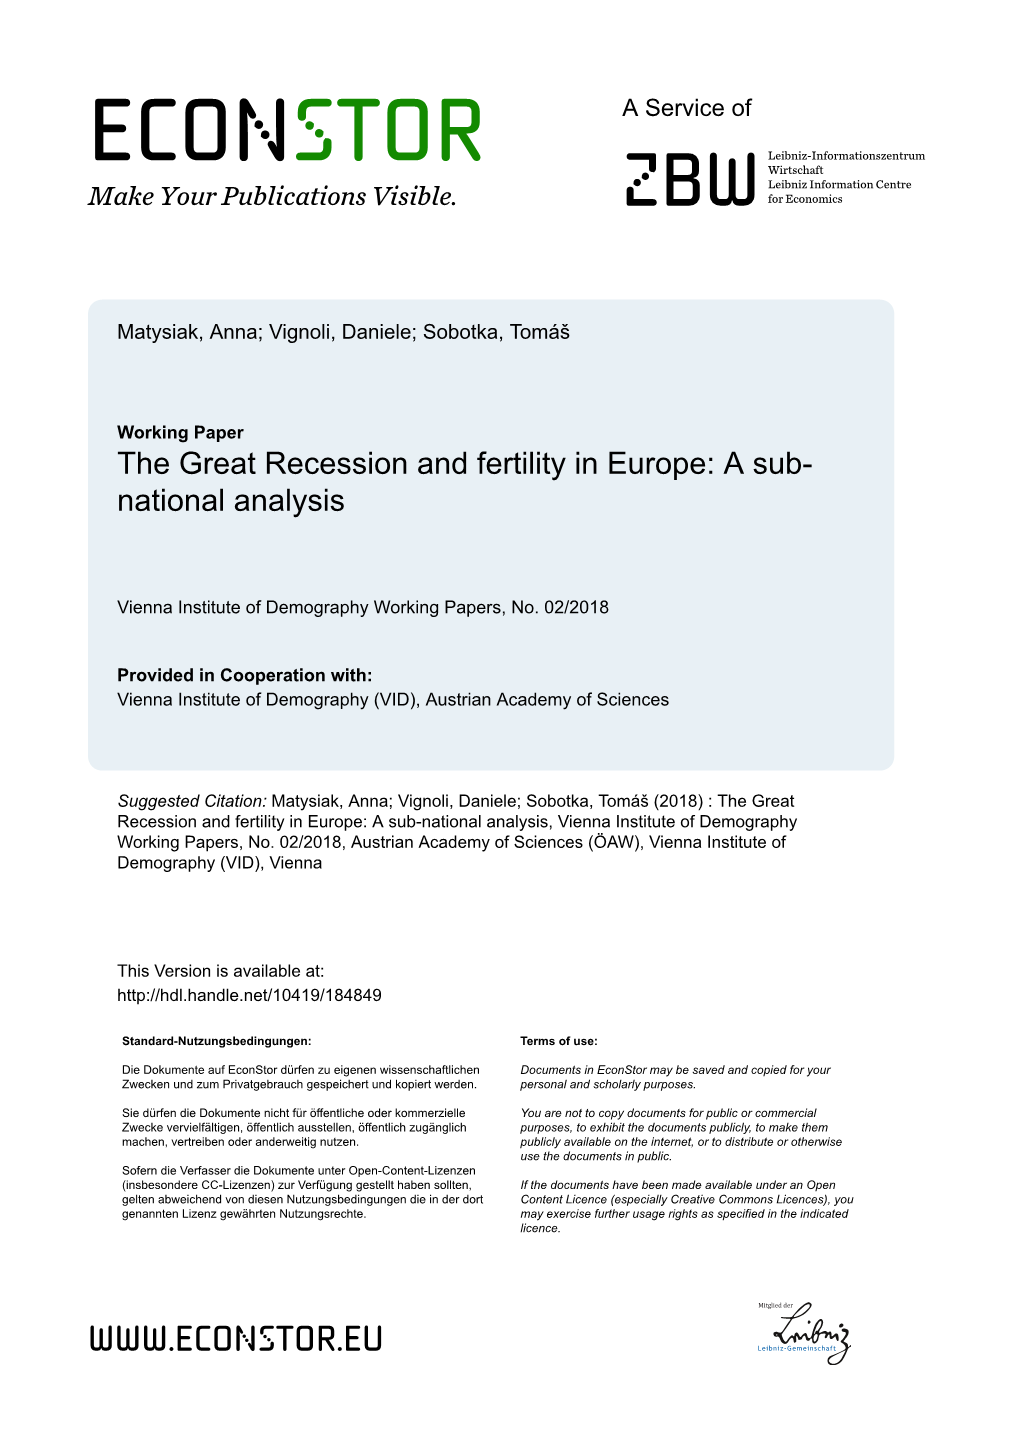 The Great Recession and Fertility in Europe: a Sub-National Analysis, Vienna Institute of Demography Working Papers, No